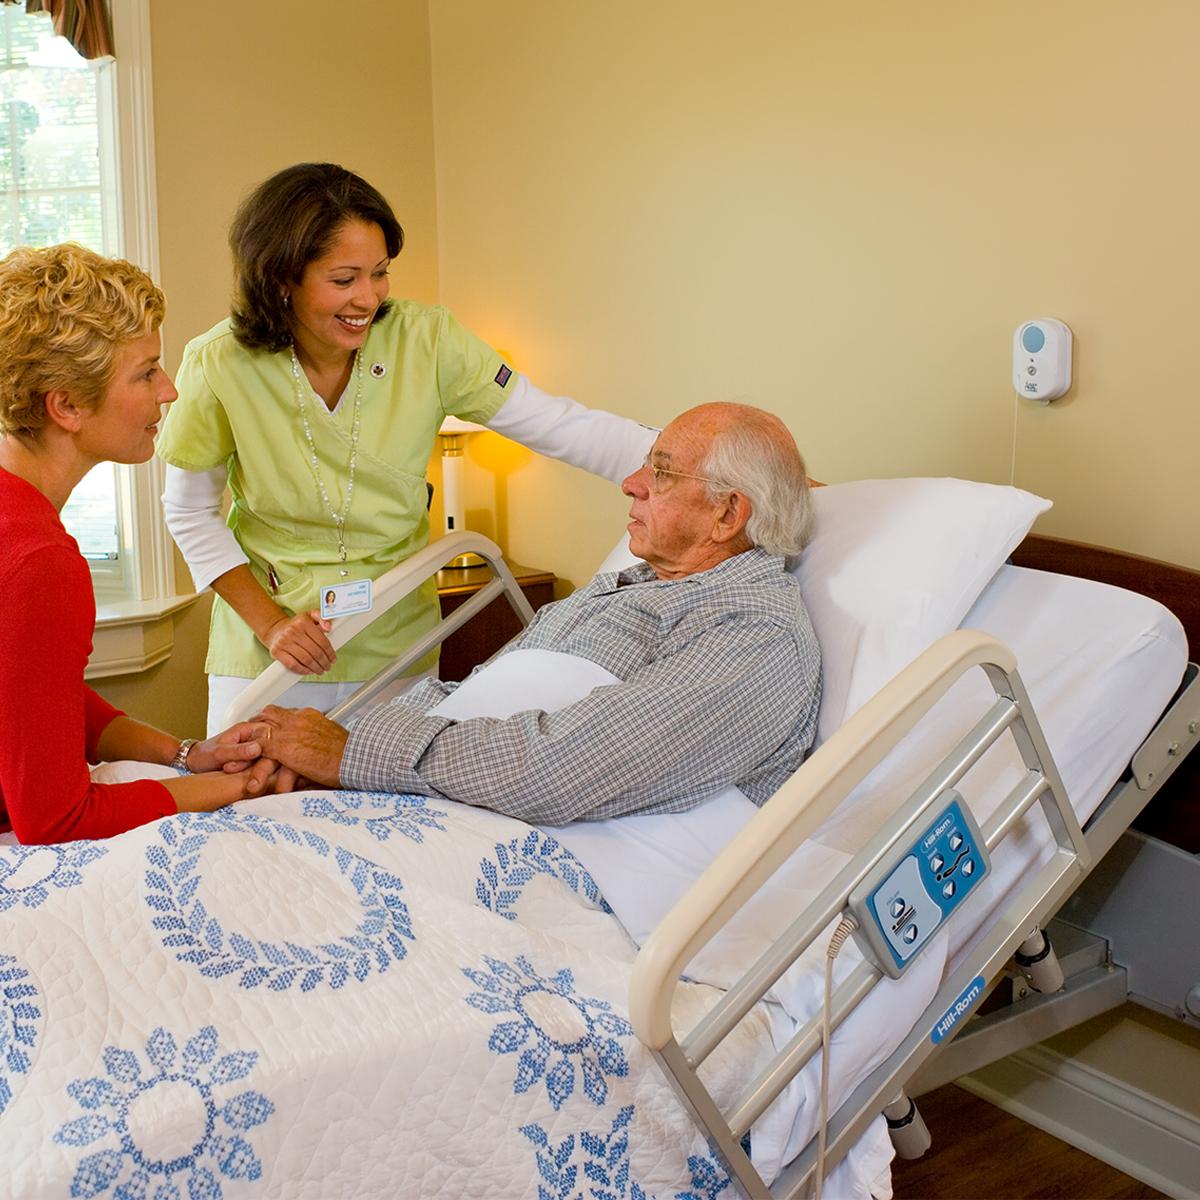 Older patient reclines in bed, talking with clinician and family member